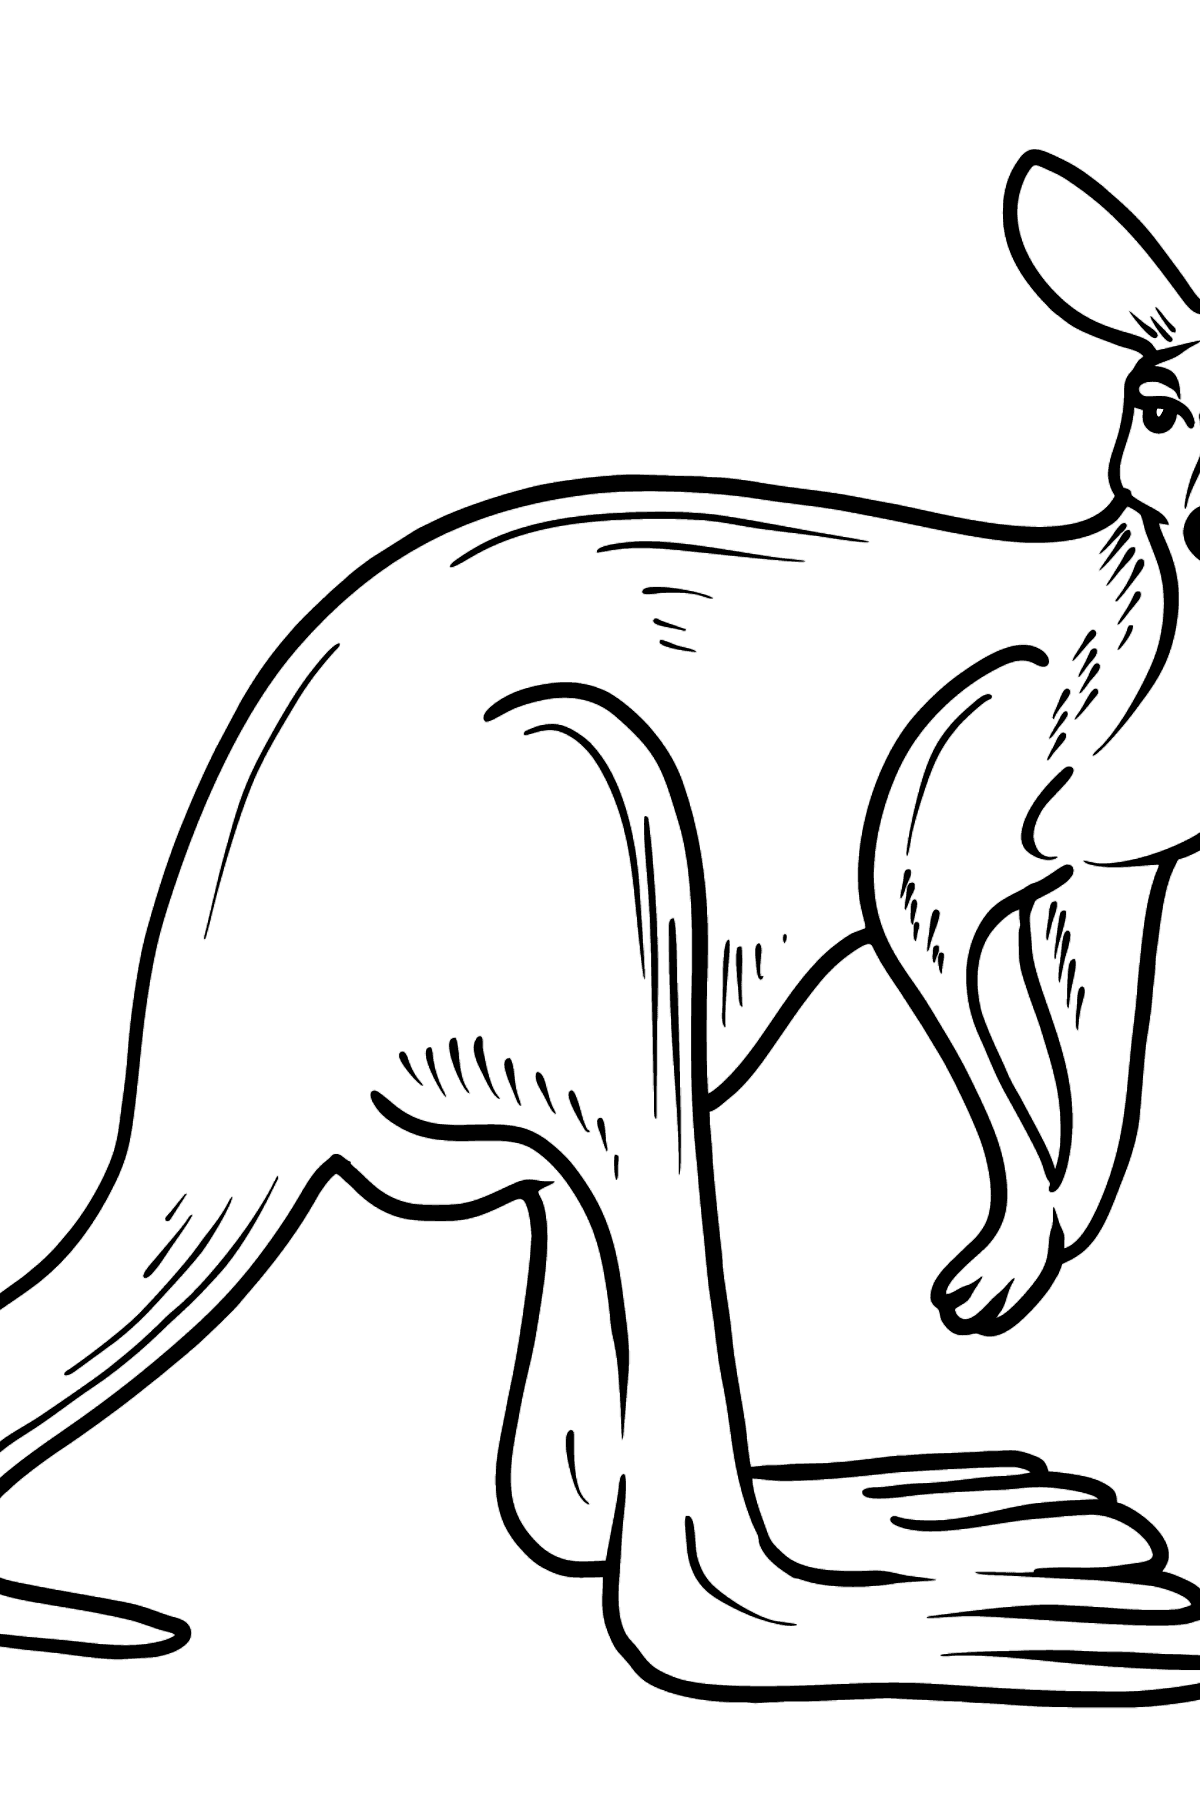 Kangaroo coloring page - Coloring Pages for Kids